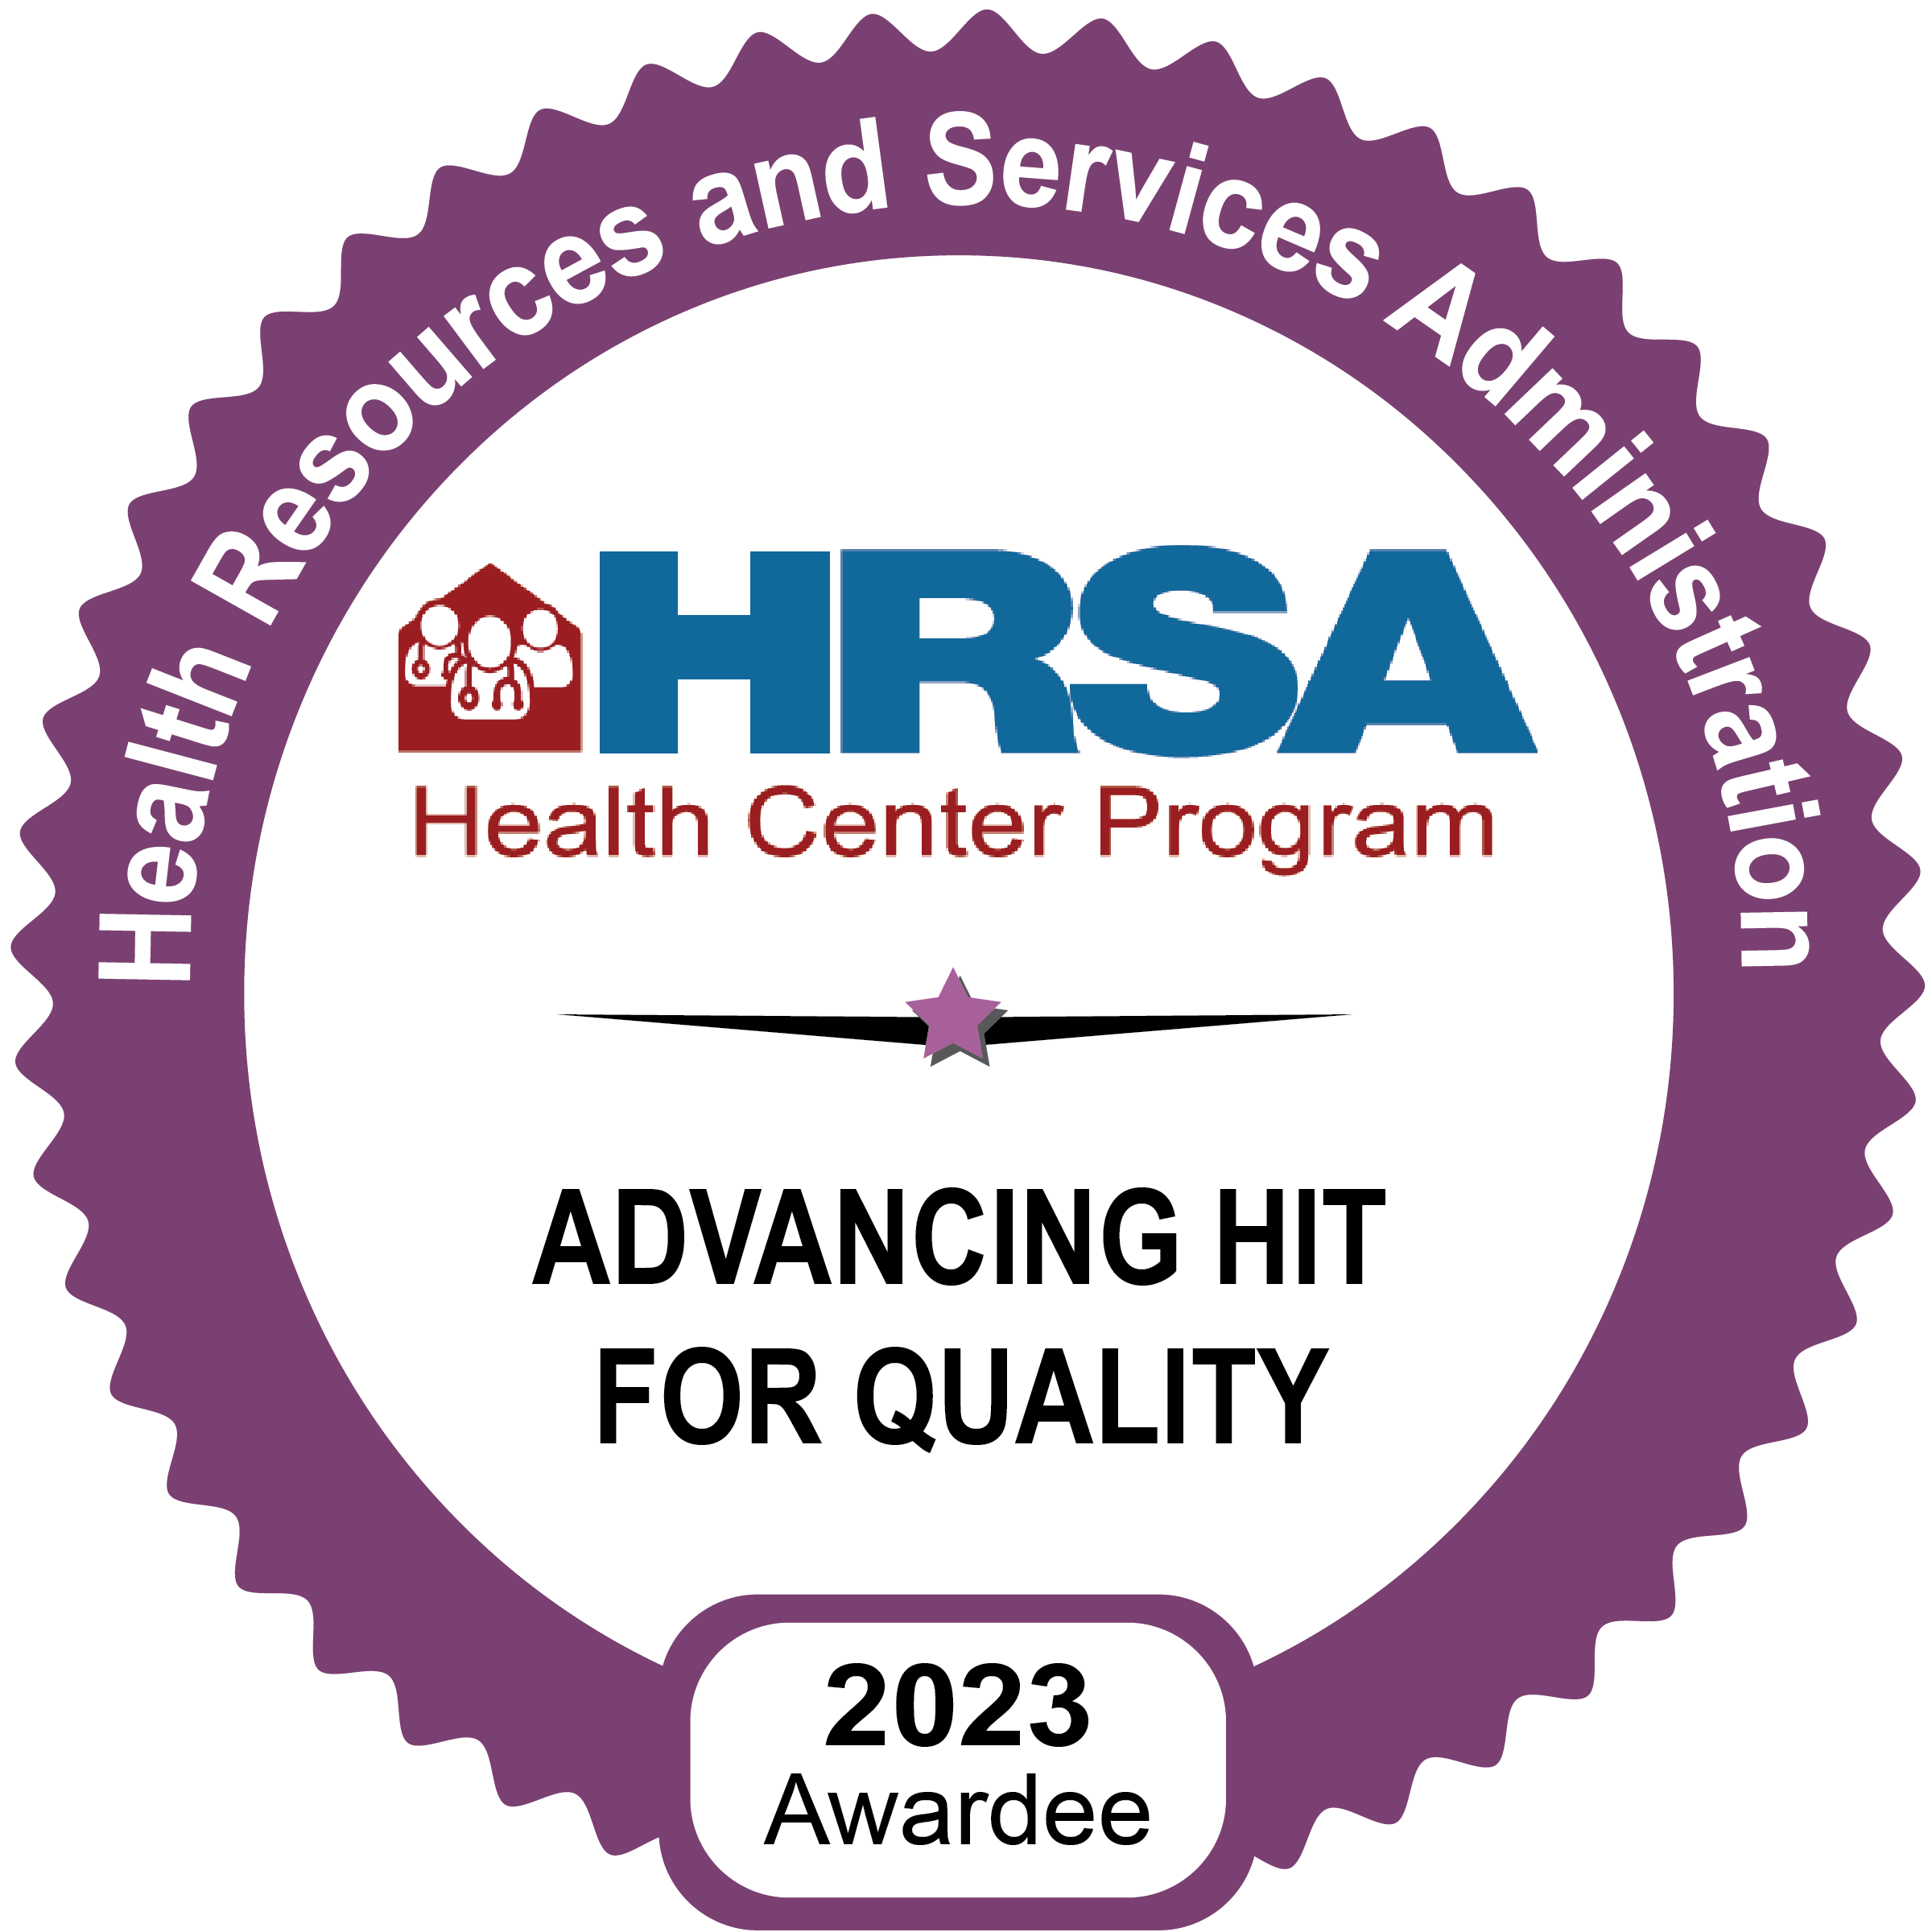 HRSA 2023 Advancing Hit for Quality